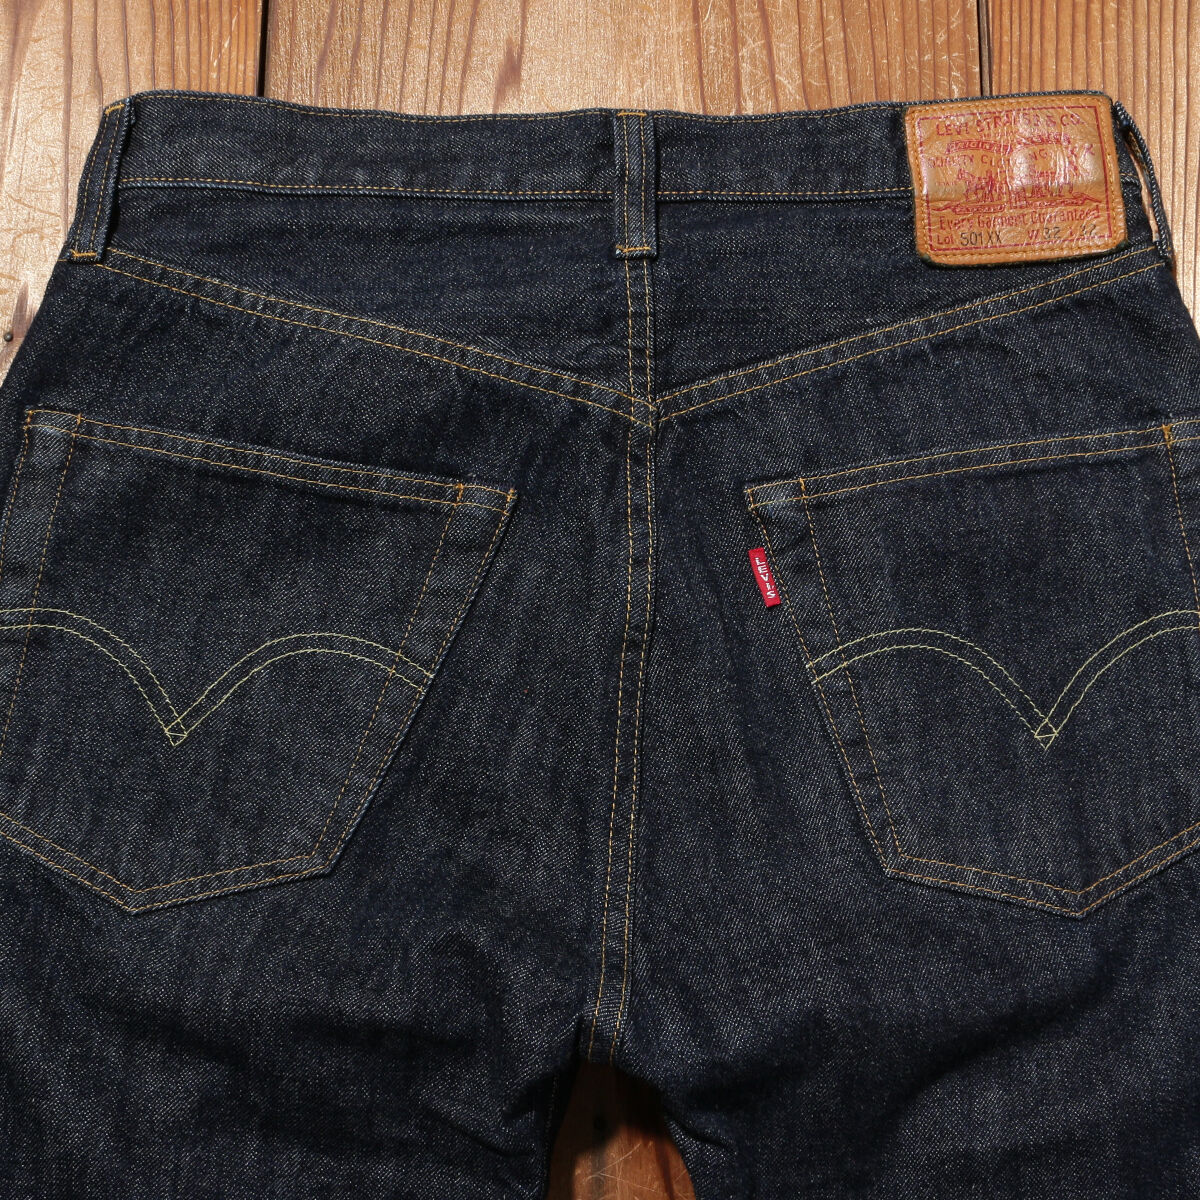 LEVI'S® VINTAGE CLOTHING1947モデル 501® JEANS NEW RINSE